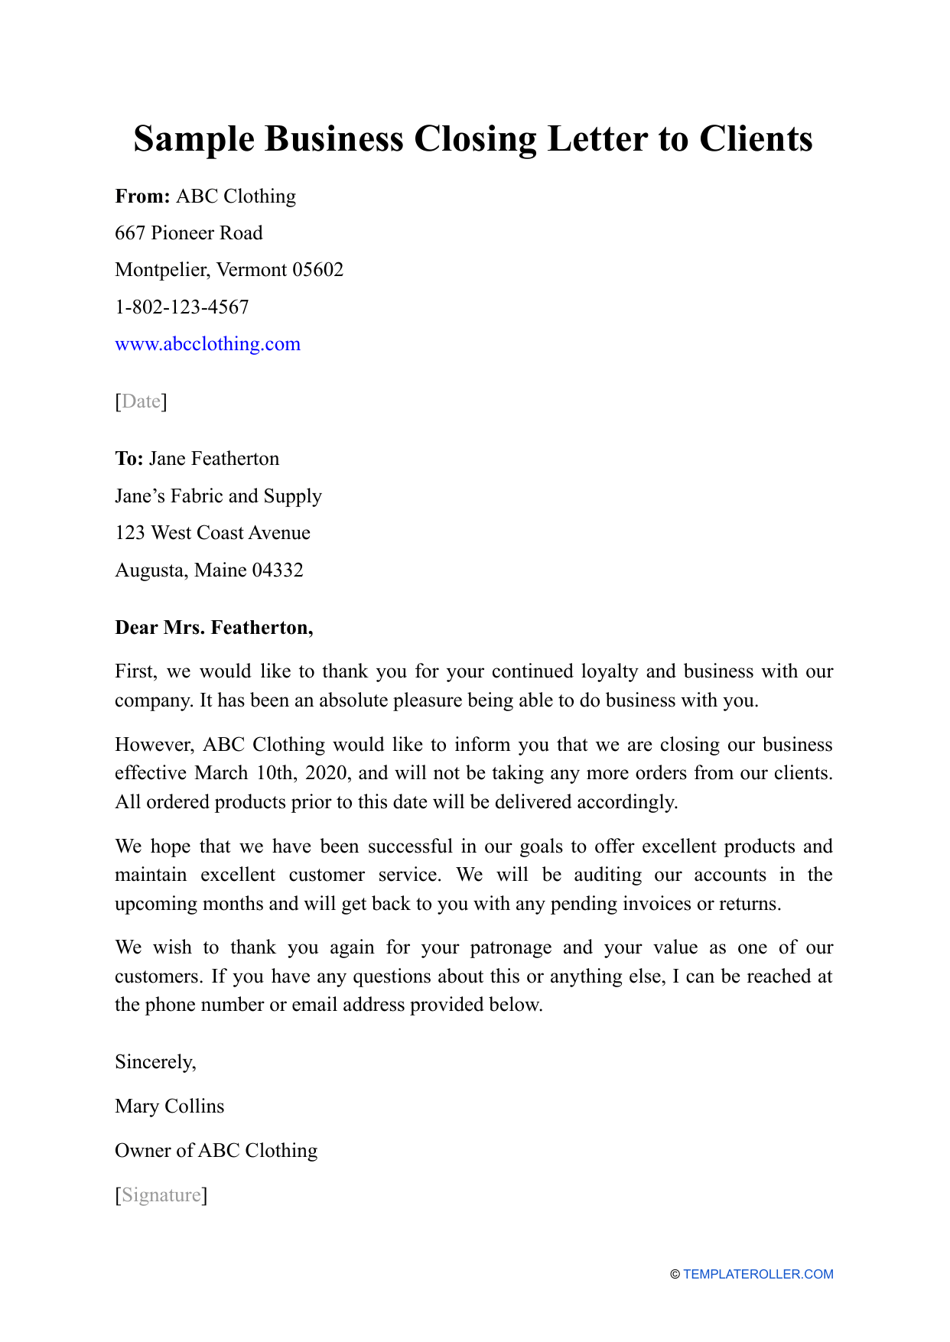 Sample Business Closing Letter to Clients, Page 1